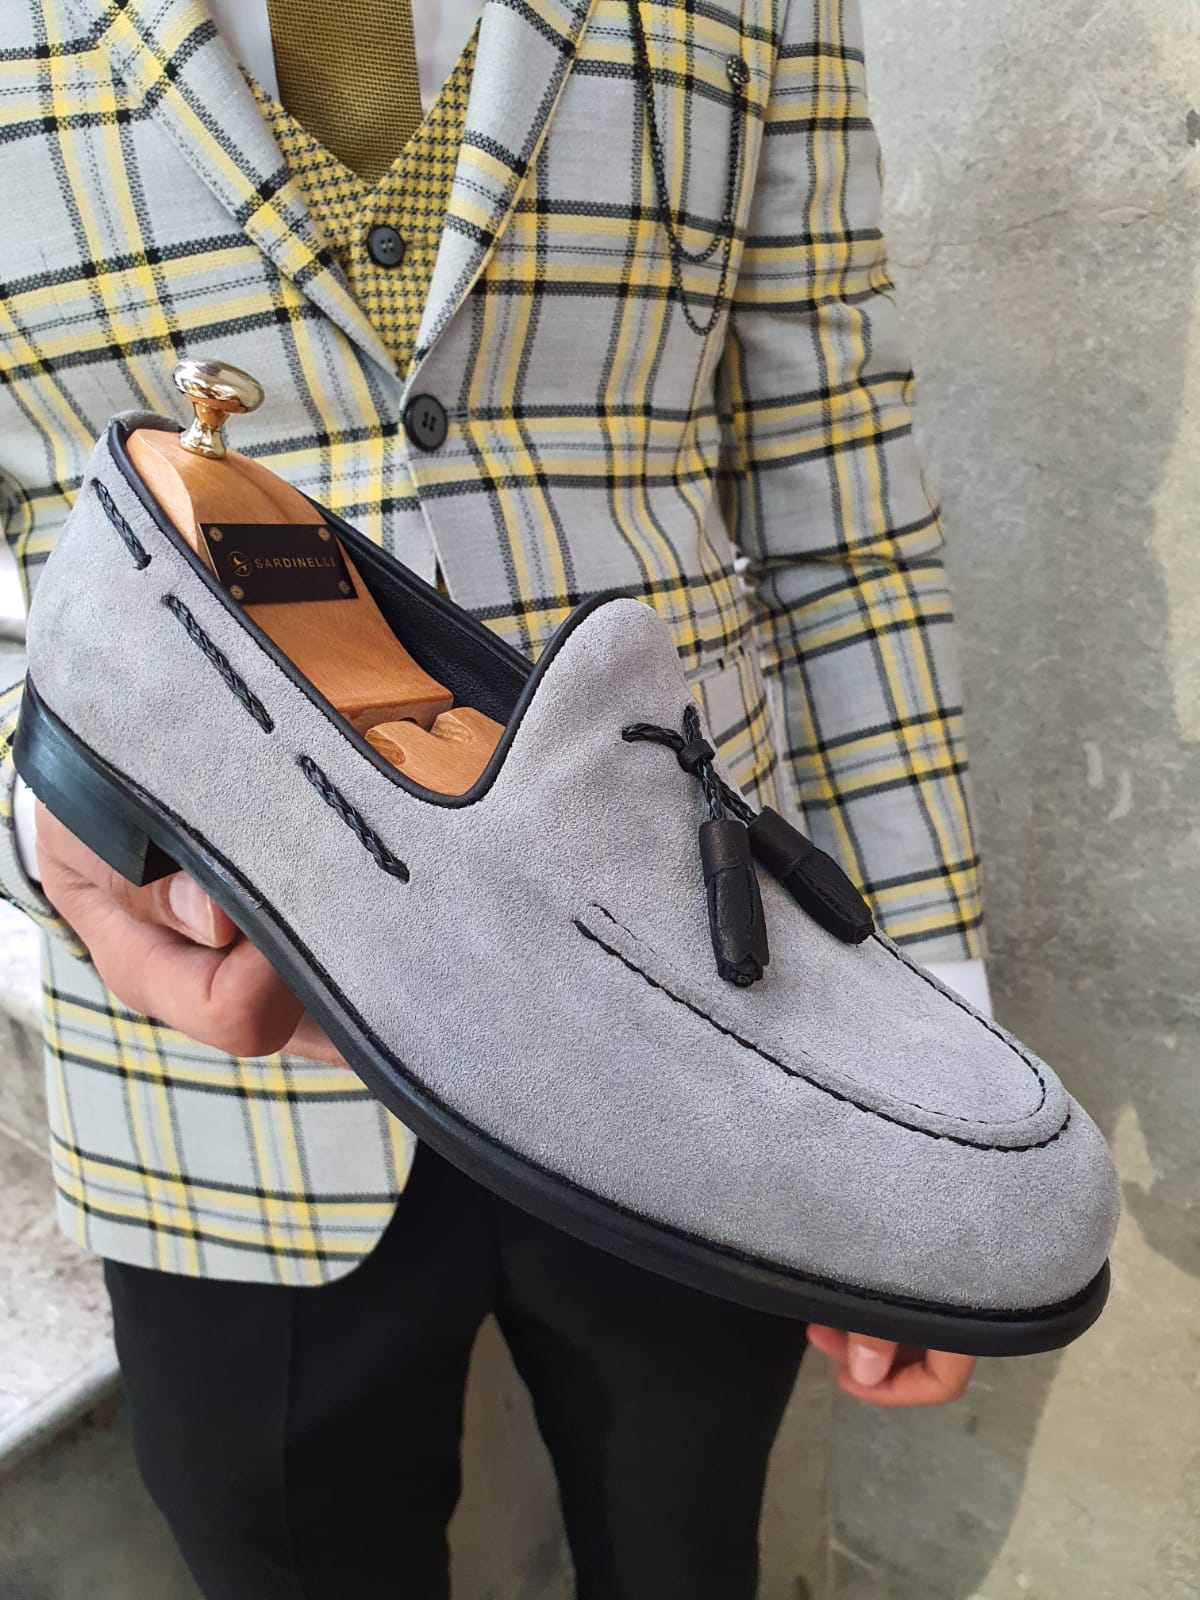 GRAY SARDINELLI SUADE CALF-LEATHER LOAFER